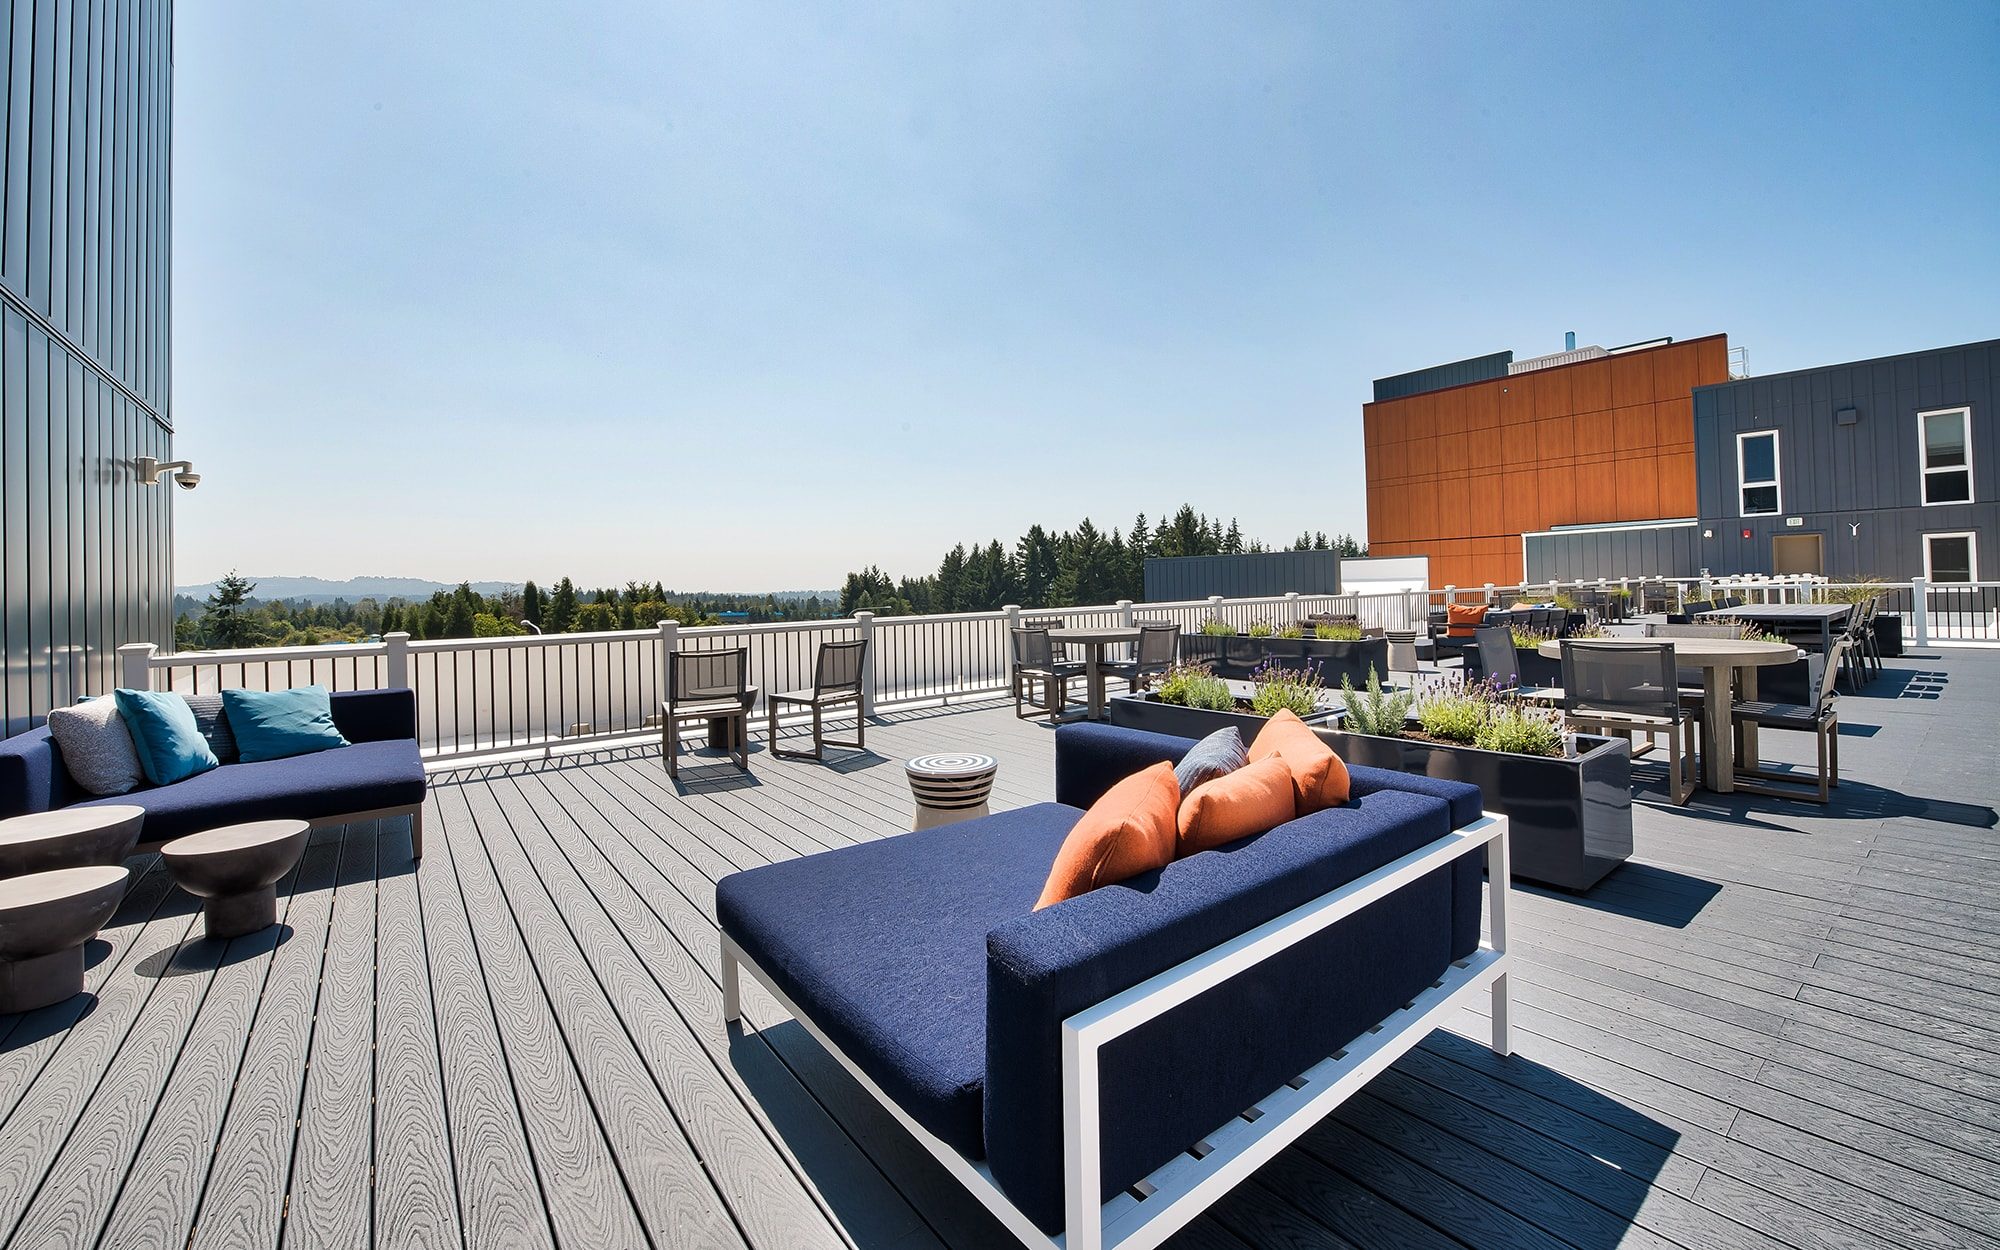 Rooftop amenity space with lounge seating and tables